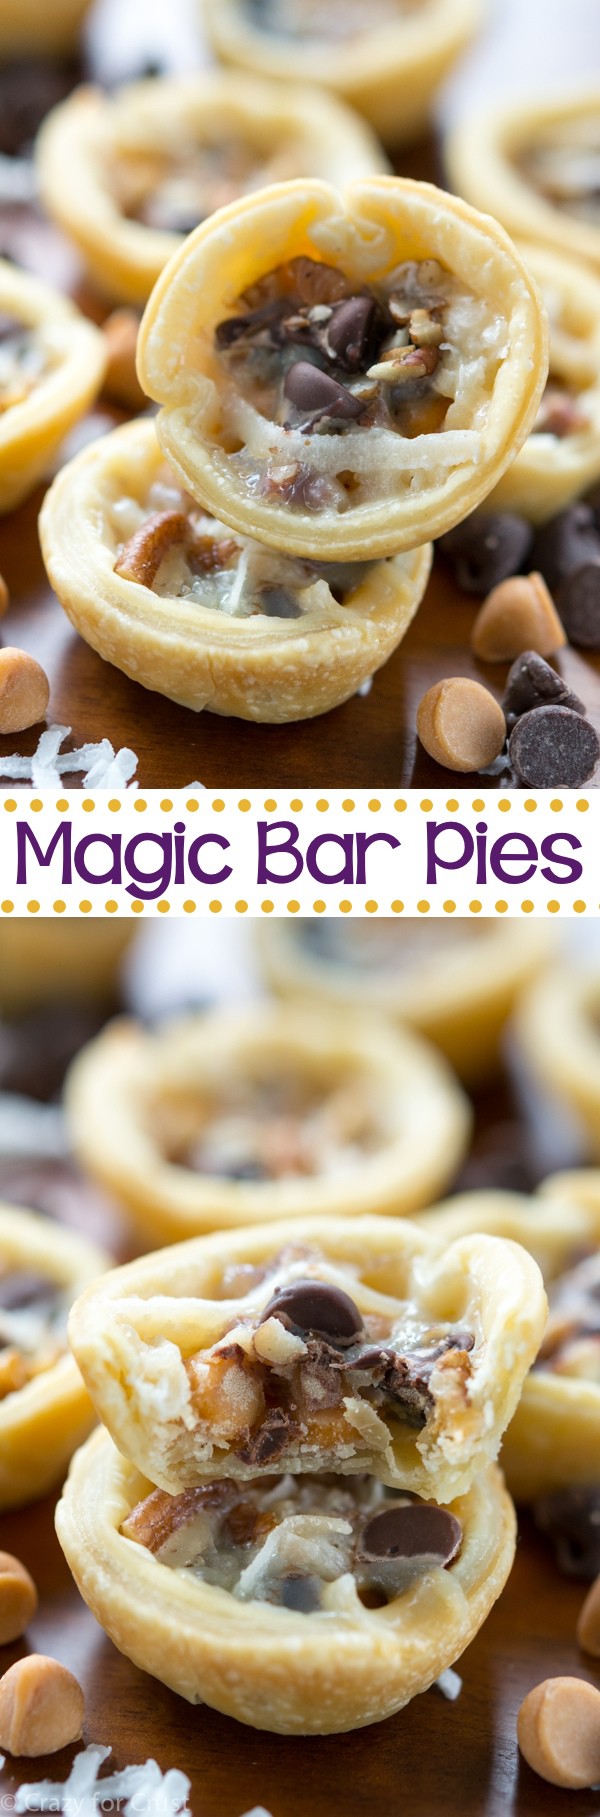 Mini Magic Bar Pies taste like a magic bar in a pie crust. An easy recipe for a bite sized pie full of chocolate and butterscotch flavor!